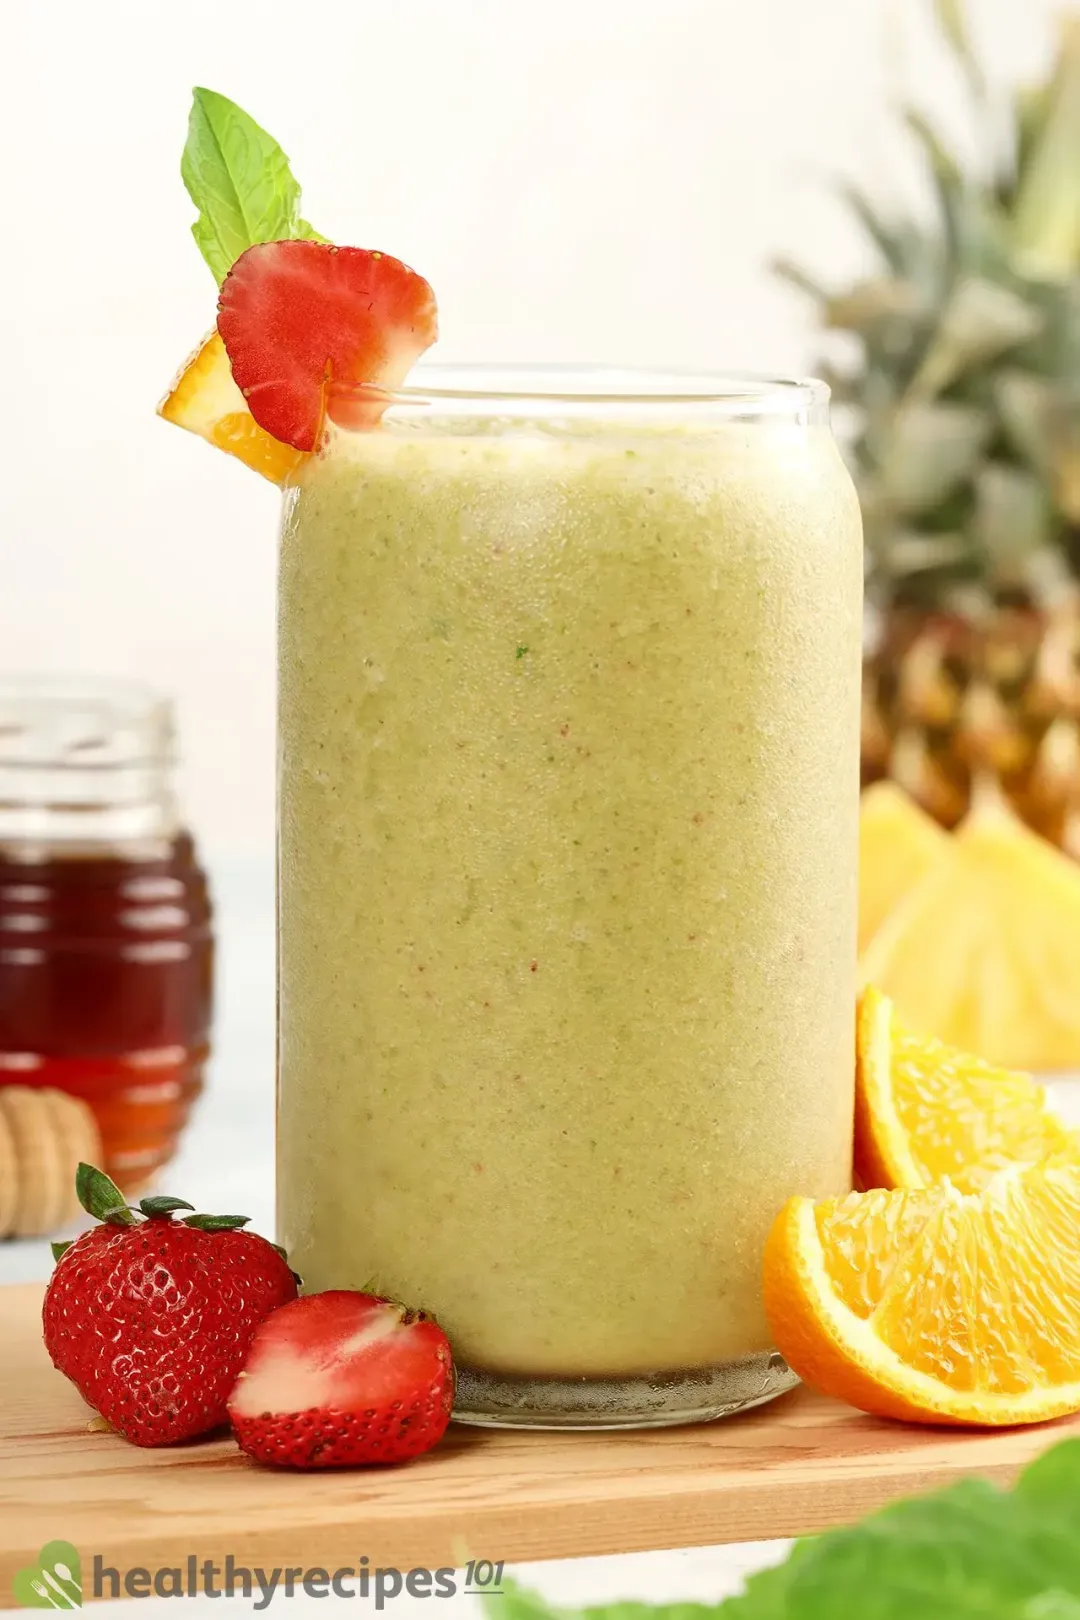 How Healthy Is a Banana Pineapple Smoothie